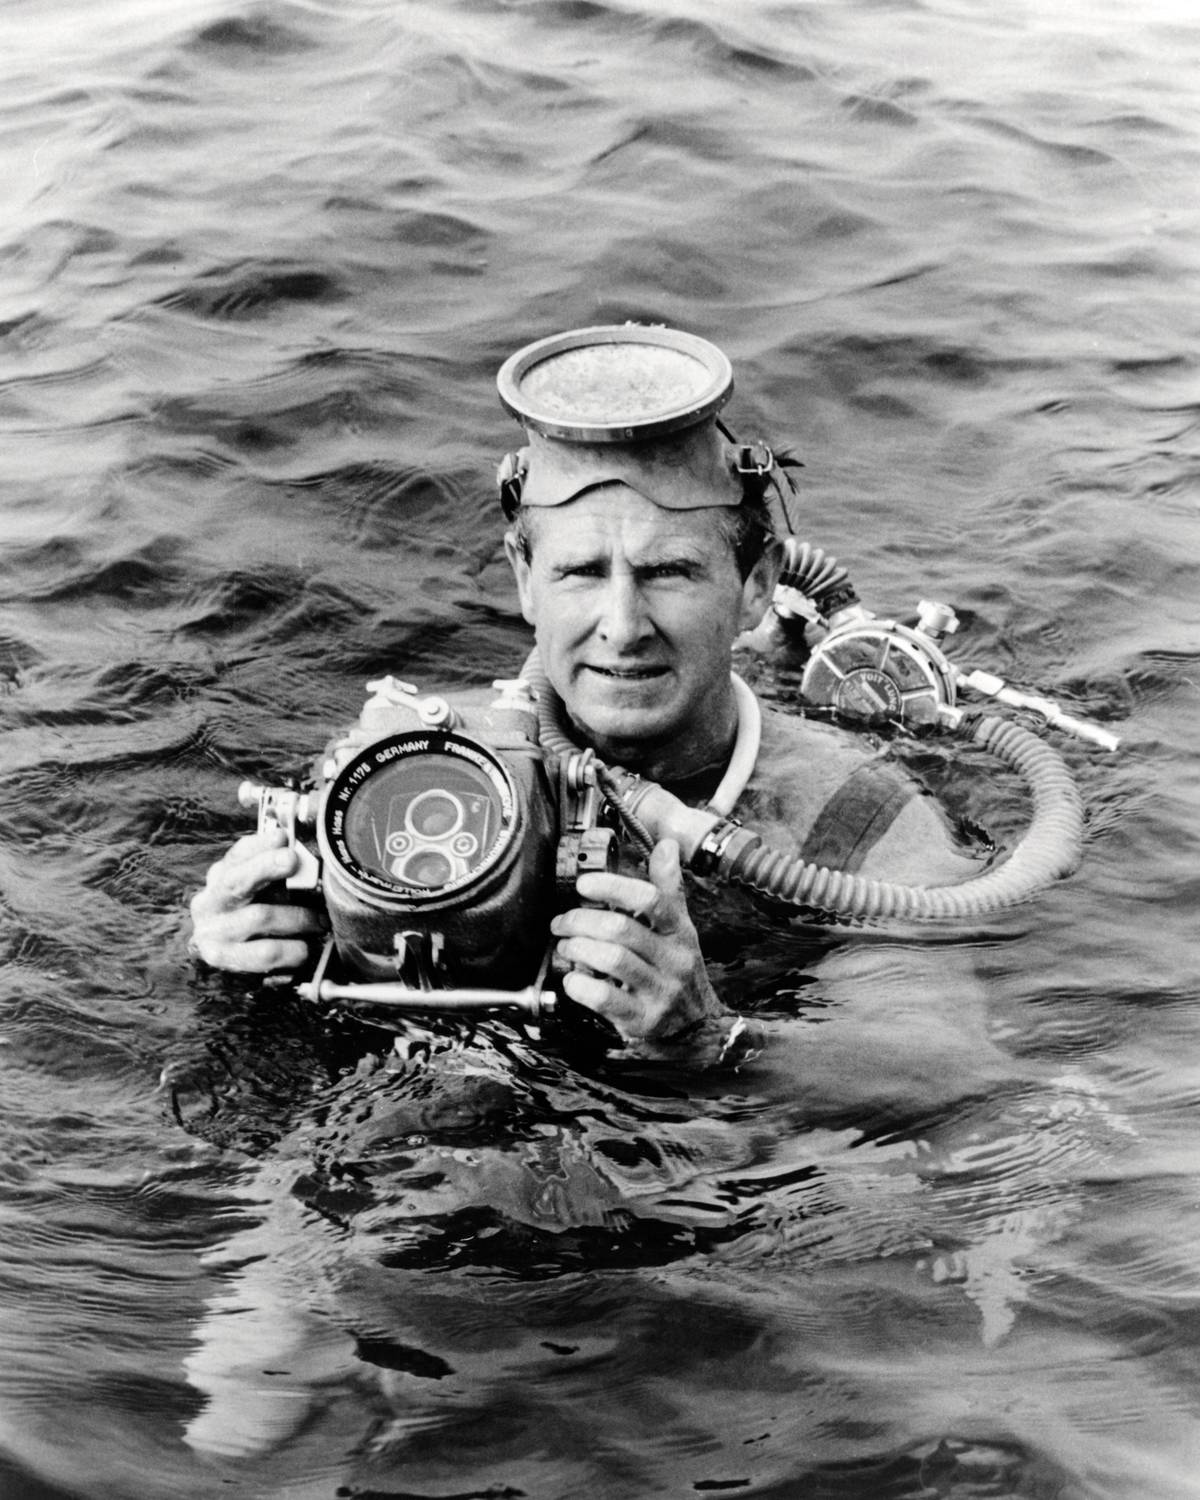 <p><i>Sea Hunt</i> was an action-adventure television series that aired from 1958 to 1961, staying very popular for decades after the last episode. Starring Lloyd Bridges as ex-Navy diver Mike Nelson, the show features various underwater shots and daring rescues made by the lead character.</p> <p>Along with its great visual effects, the series made sure to remind viewers of the importance of conserving the environment. The series ran for four seasons, with a total of 155 episodes. </p>